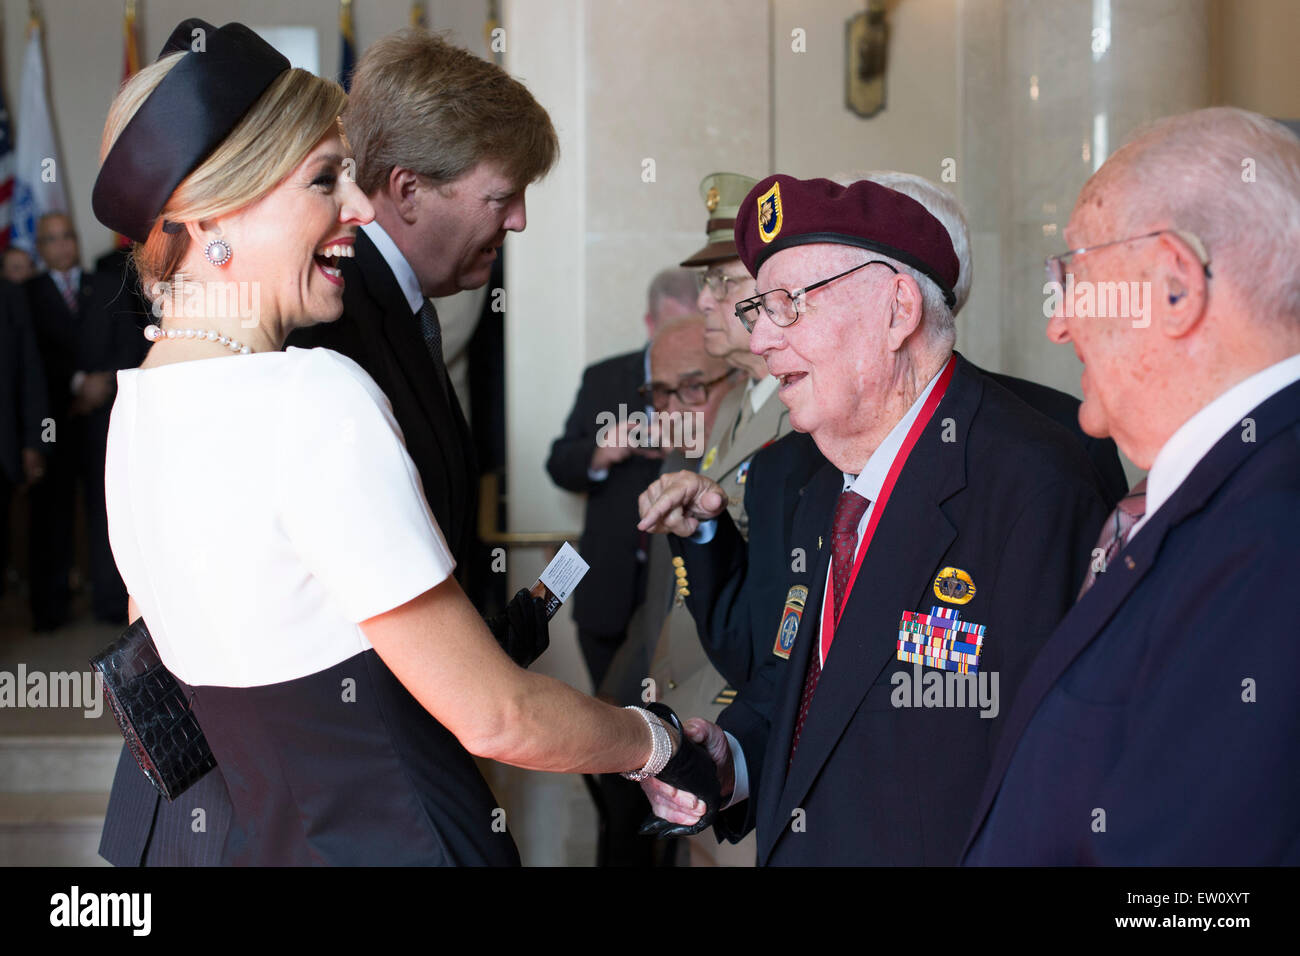 Queen Maxima of the Netherlands meets with World War II and Korean War veterans during a visit to the Memorial Display Room at Arlington National Cemetery June 1, 2015, in Arlington, Virginia. The royal couple later placed a wreath at the Tomb of the Unknown Soldier and then met with veterans from World War II. Stock Photo